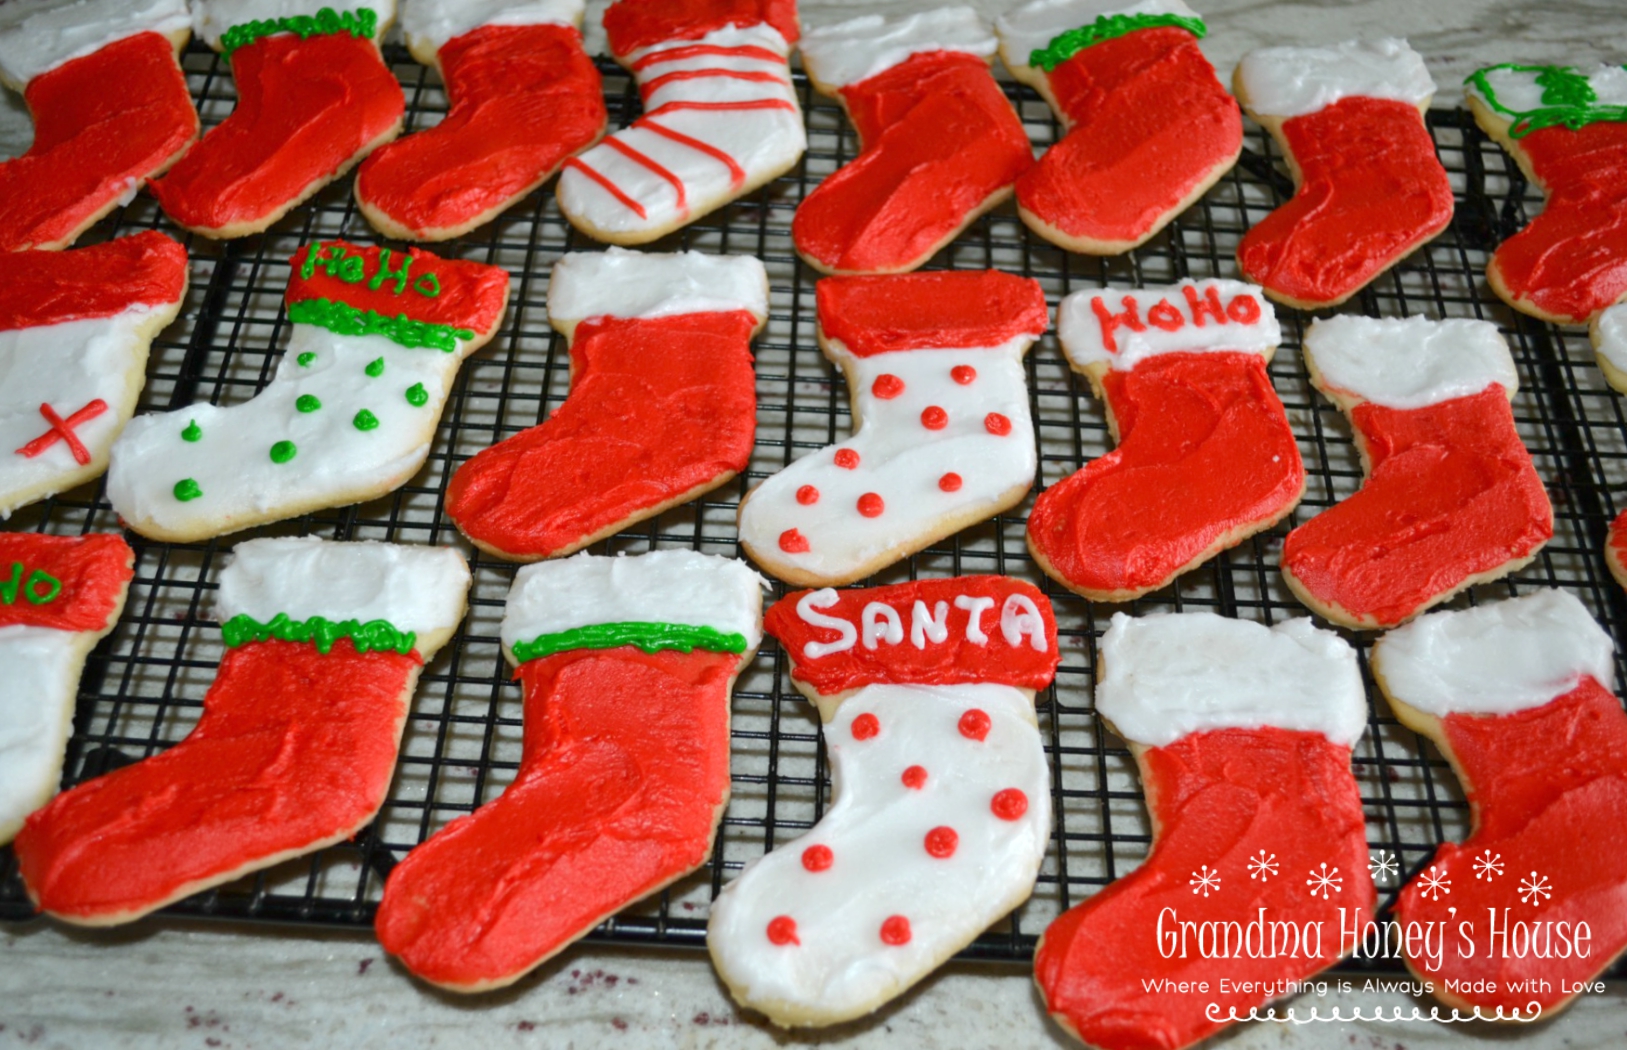 These decorated Christmas Sugar Cookies are an old time recipe that is so easy to make, delicious, and perfect for your holidays.